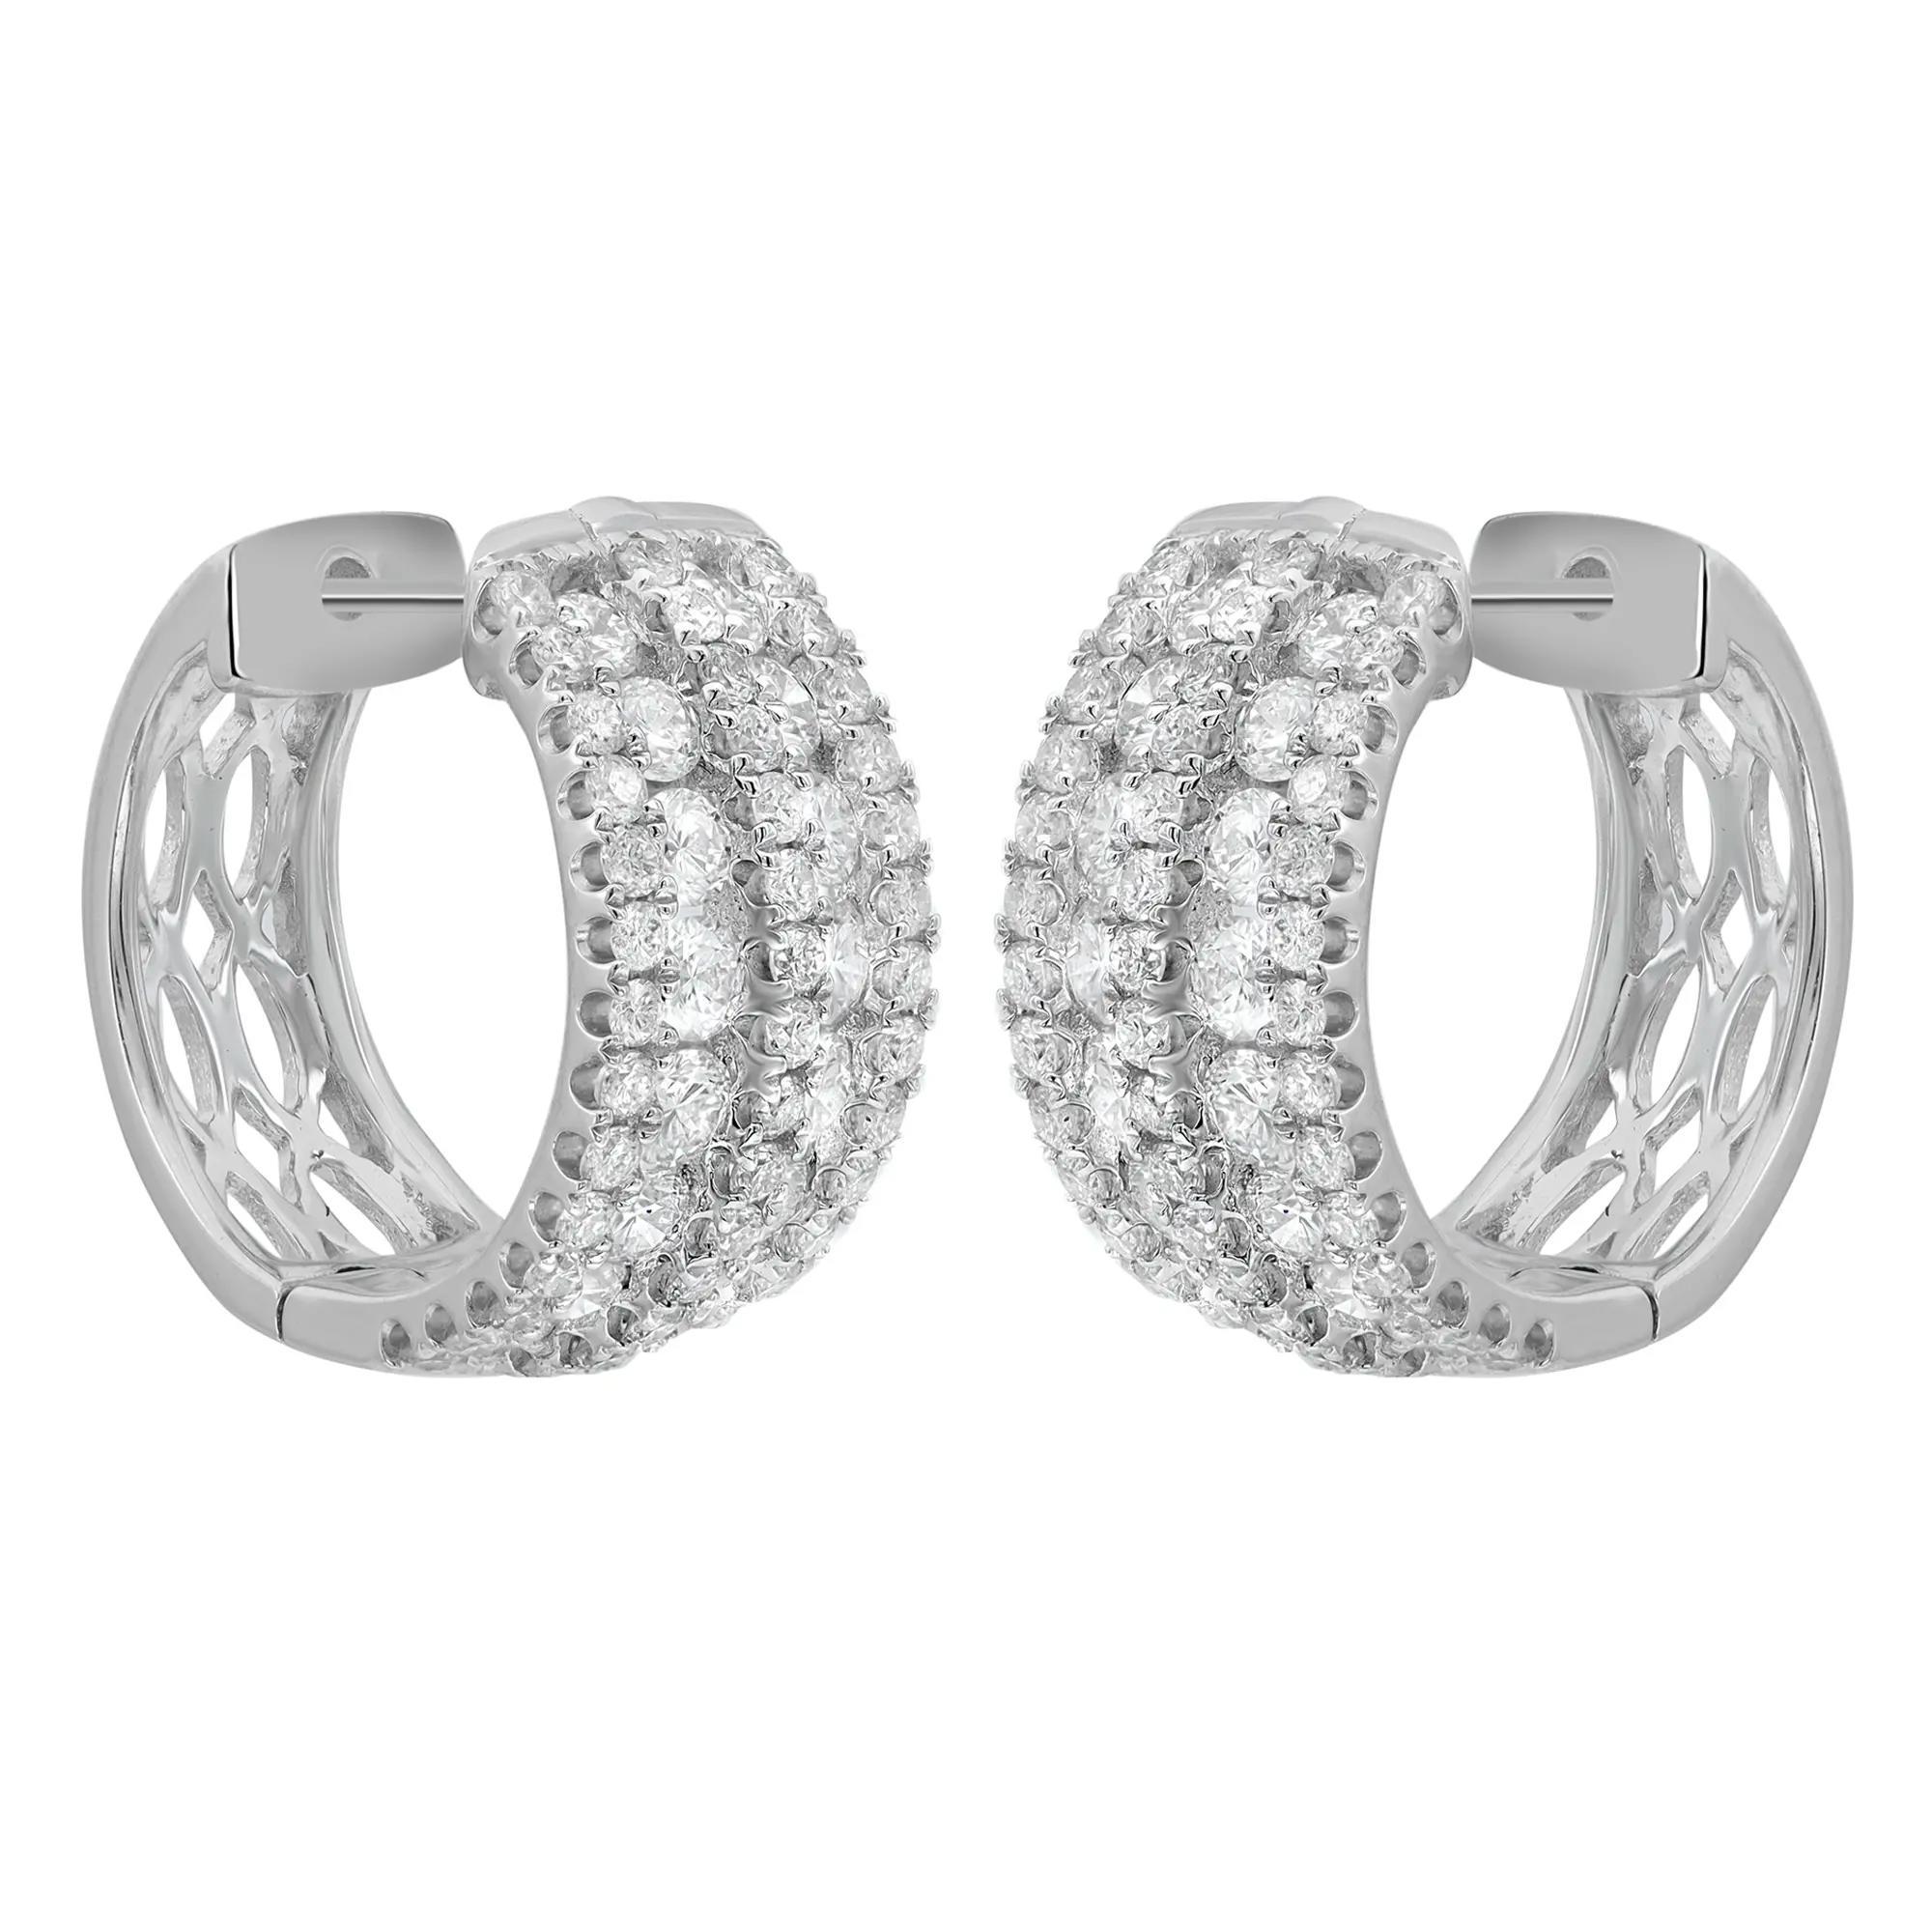 These glamorous diamond huggie earrings feature two rows of channel set dazzling round brilliant cut diamonds with three rows of prong set round cut diamonds. Total diamond weight: 1.40 carats. Encrusted in lustrous 18K white gold. Diamond quality: